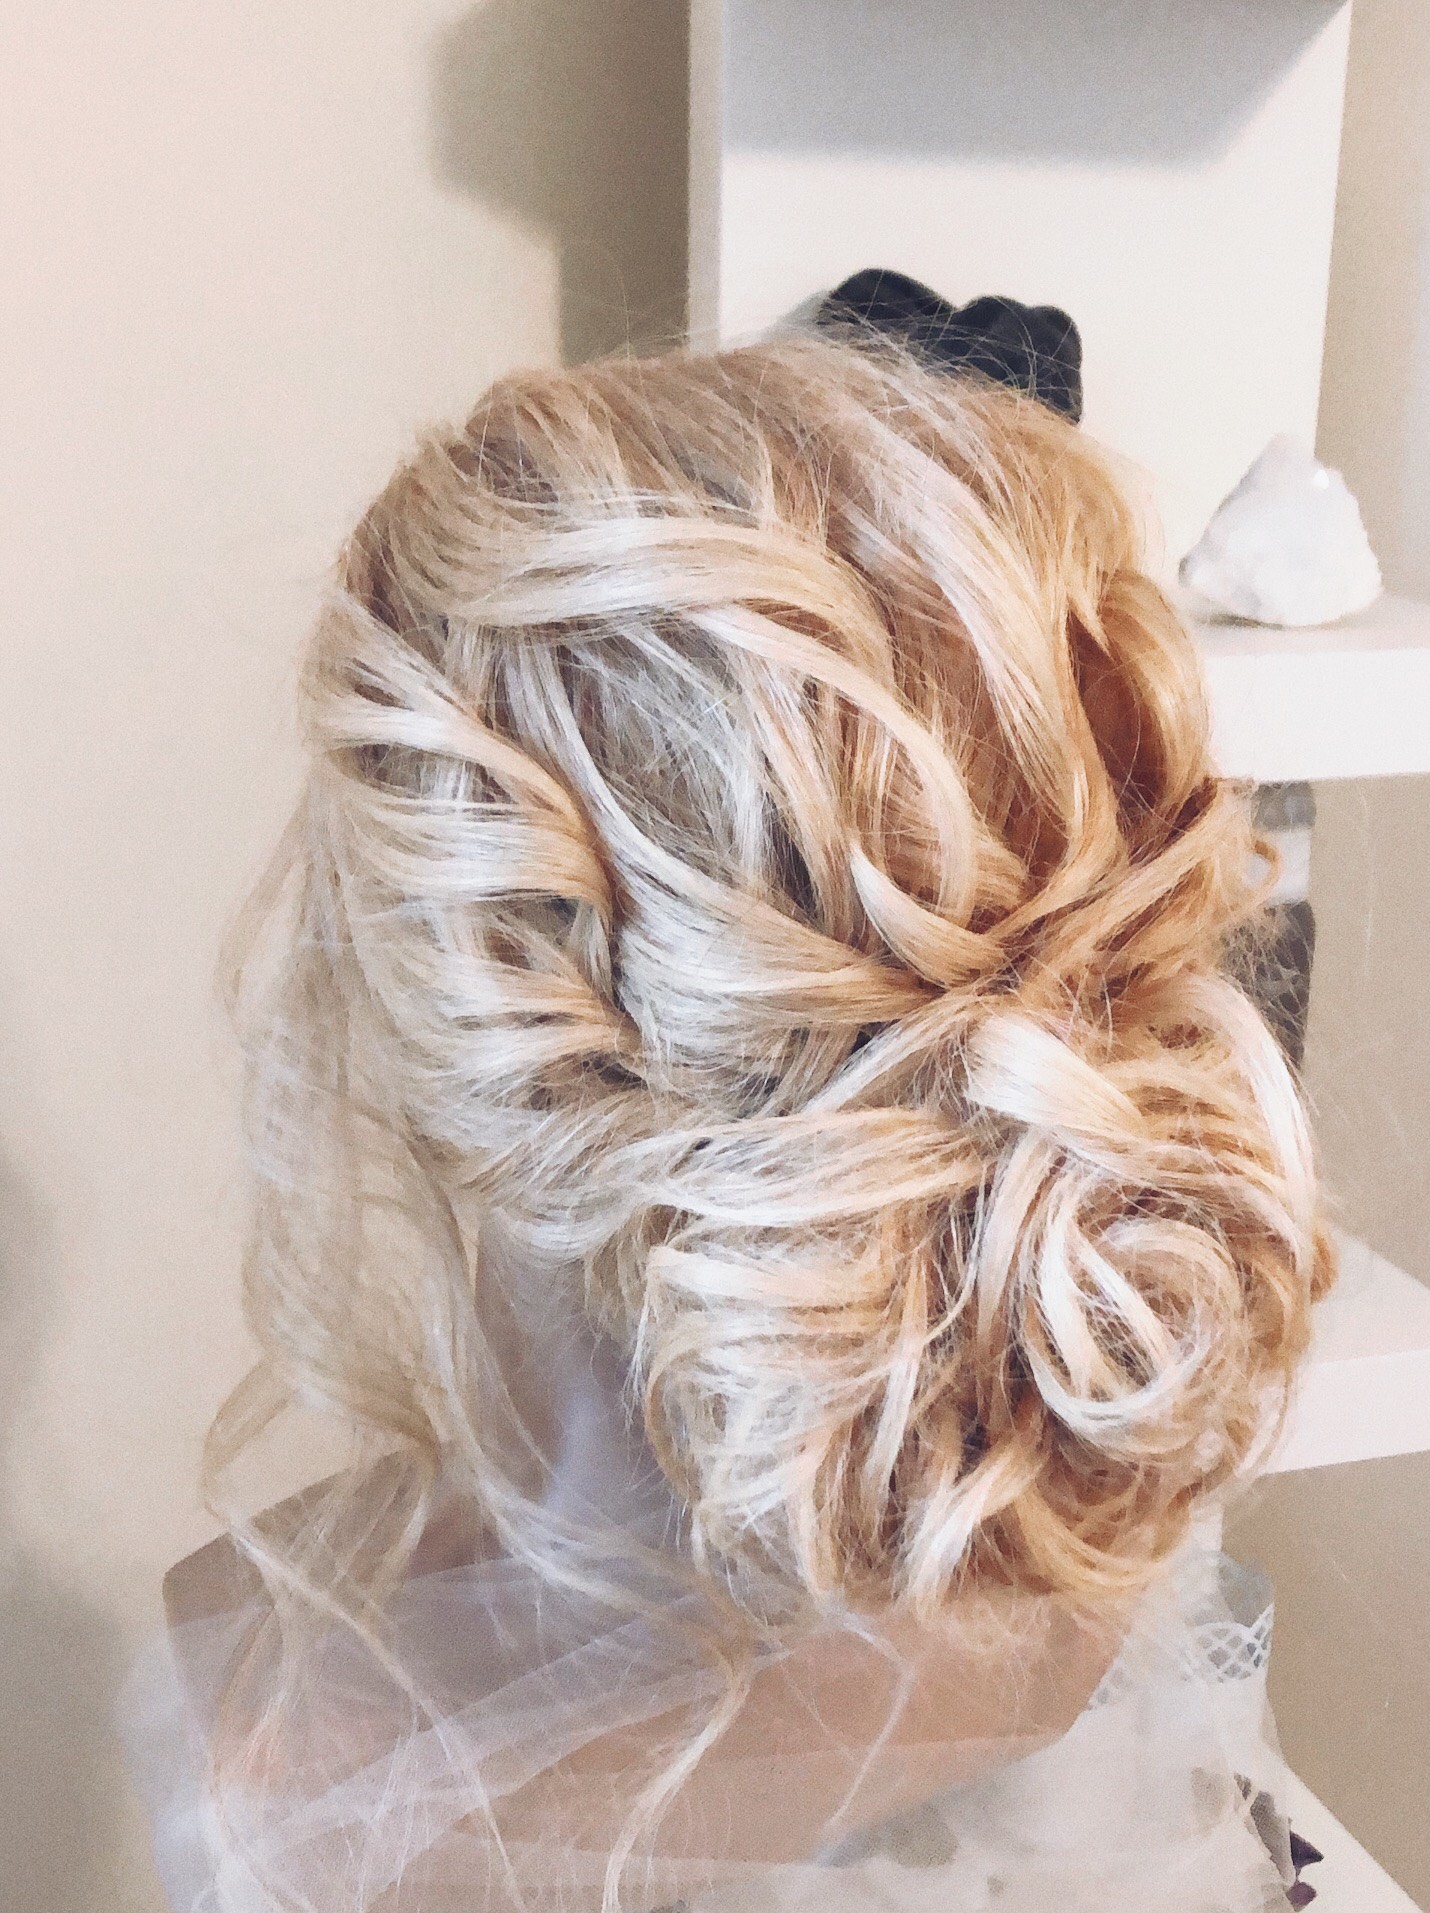 35 + Gorgeous Updo Hairstyles for every occasion - Textured Bun